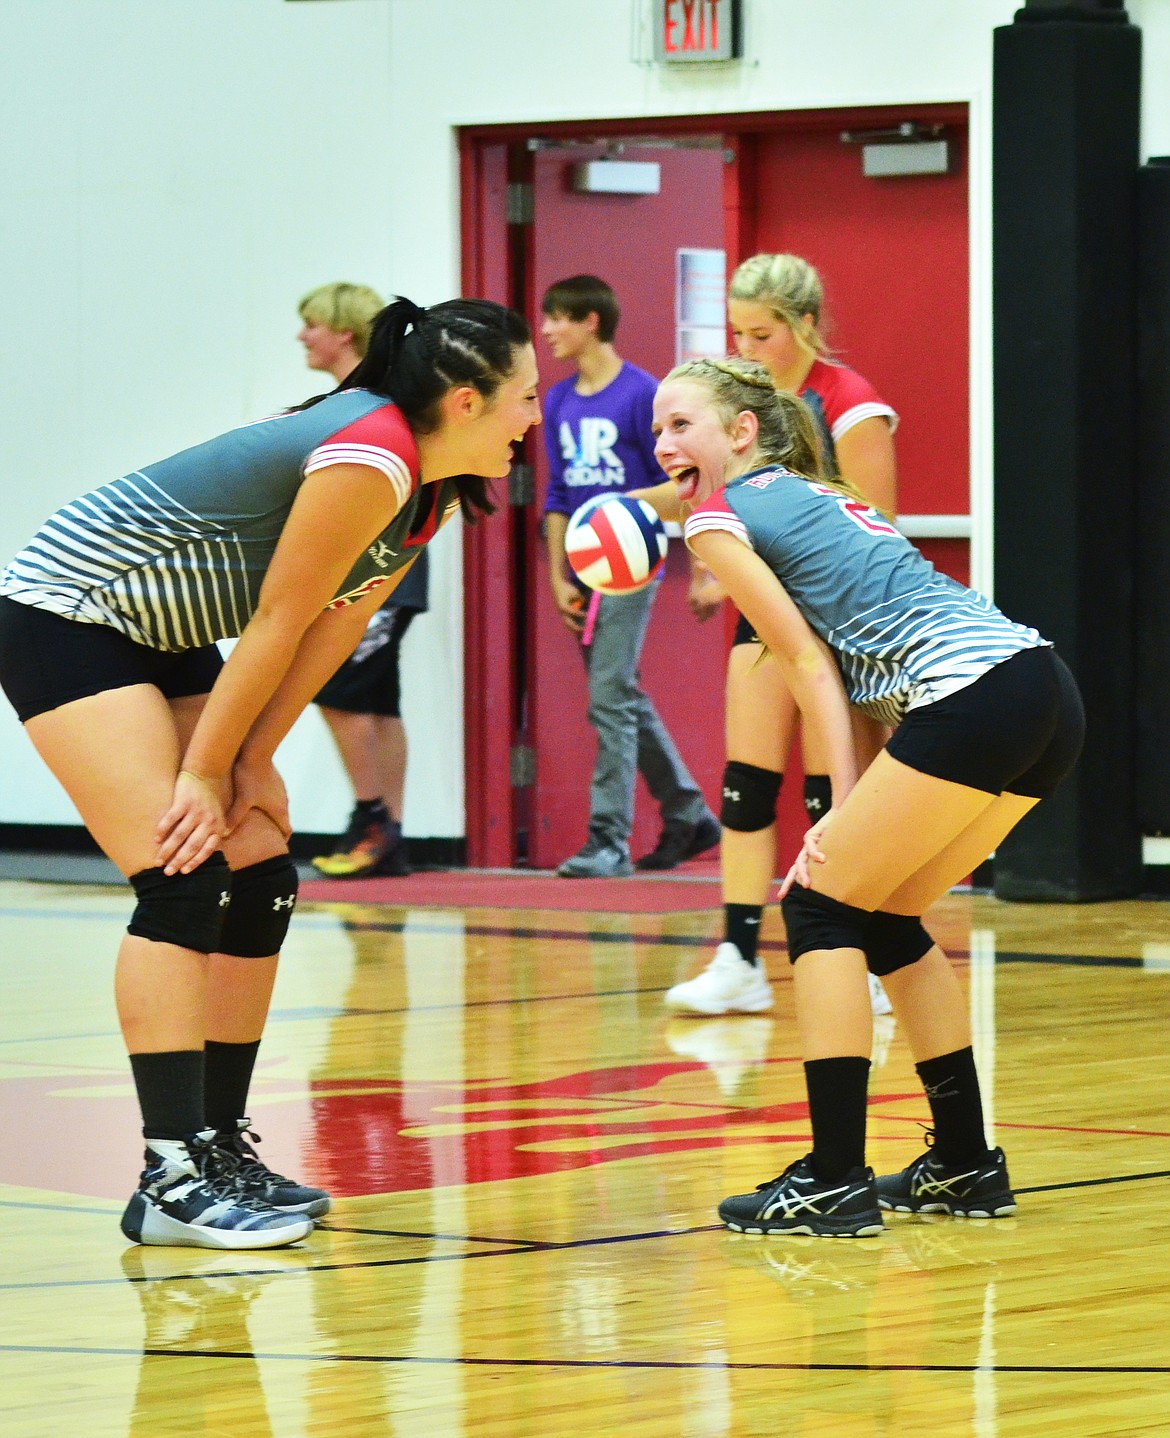 The girls get set and pumped for some offensive action on the volley ball court. (Erin Jusseaume/ Clark Fork Valley Press)